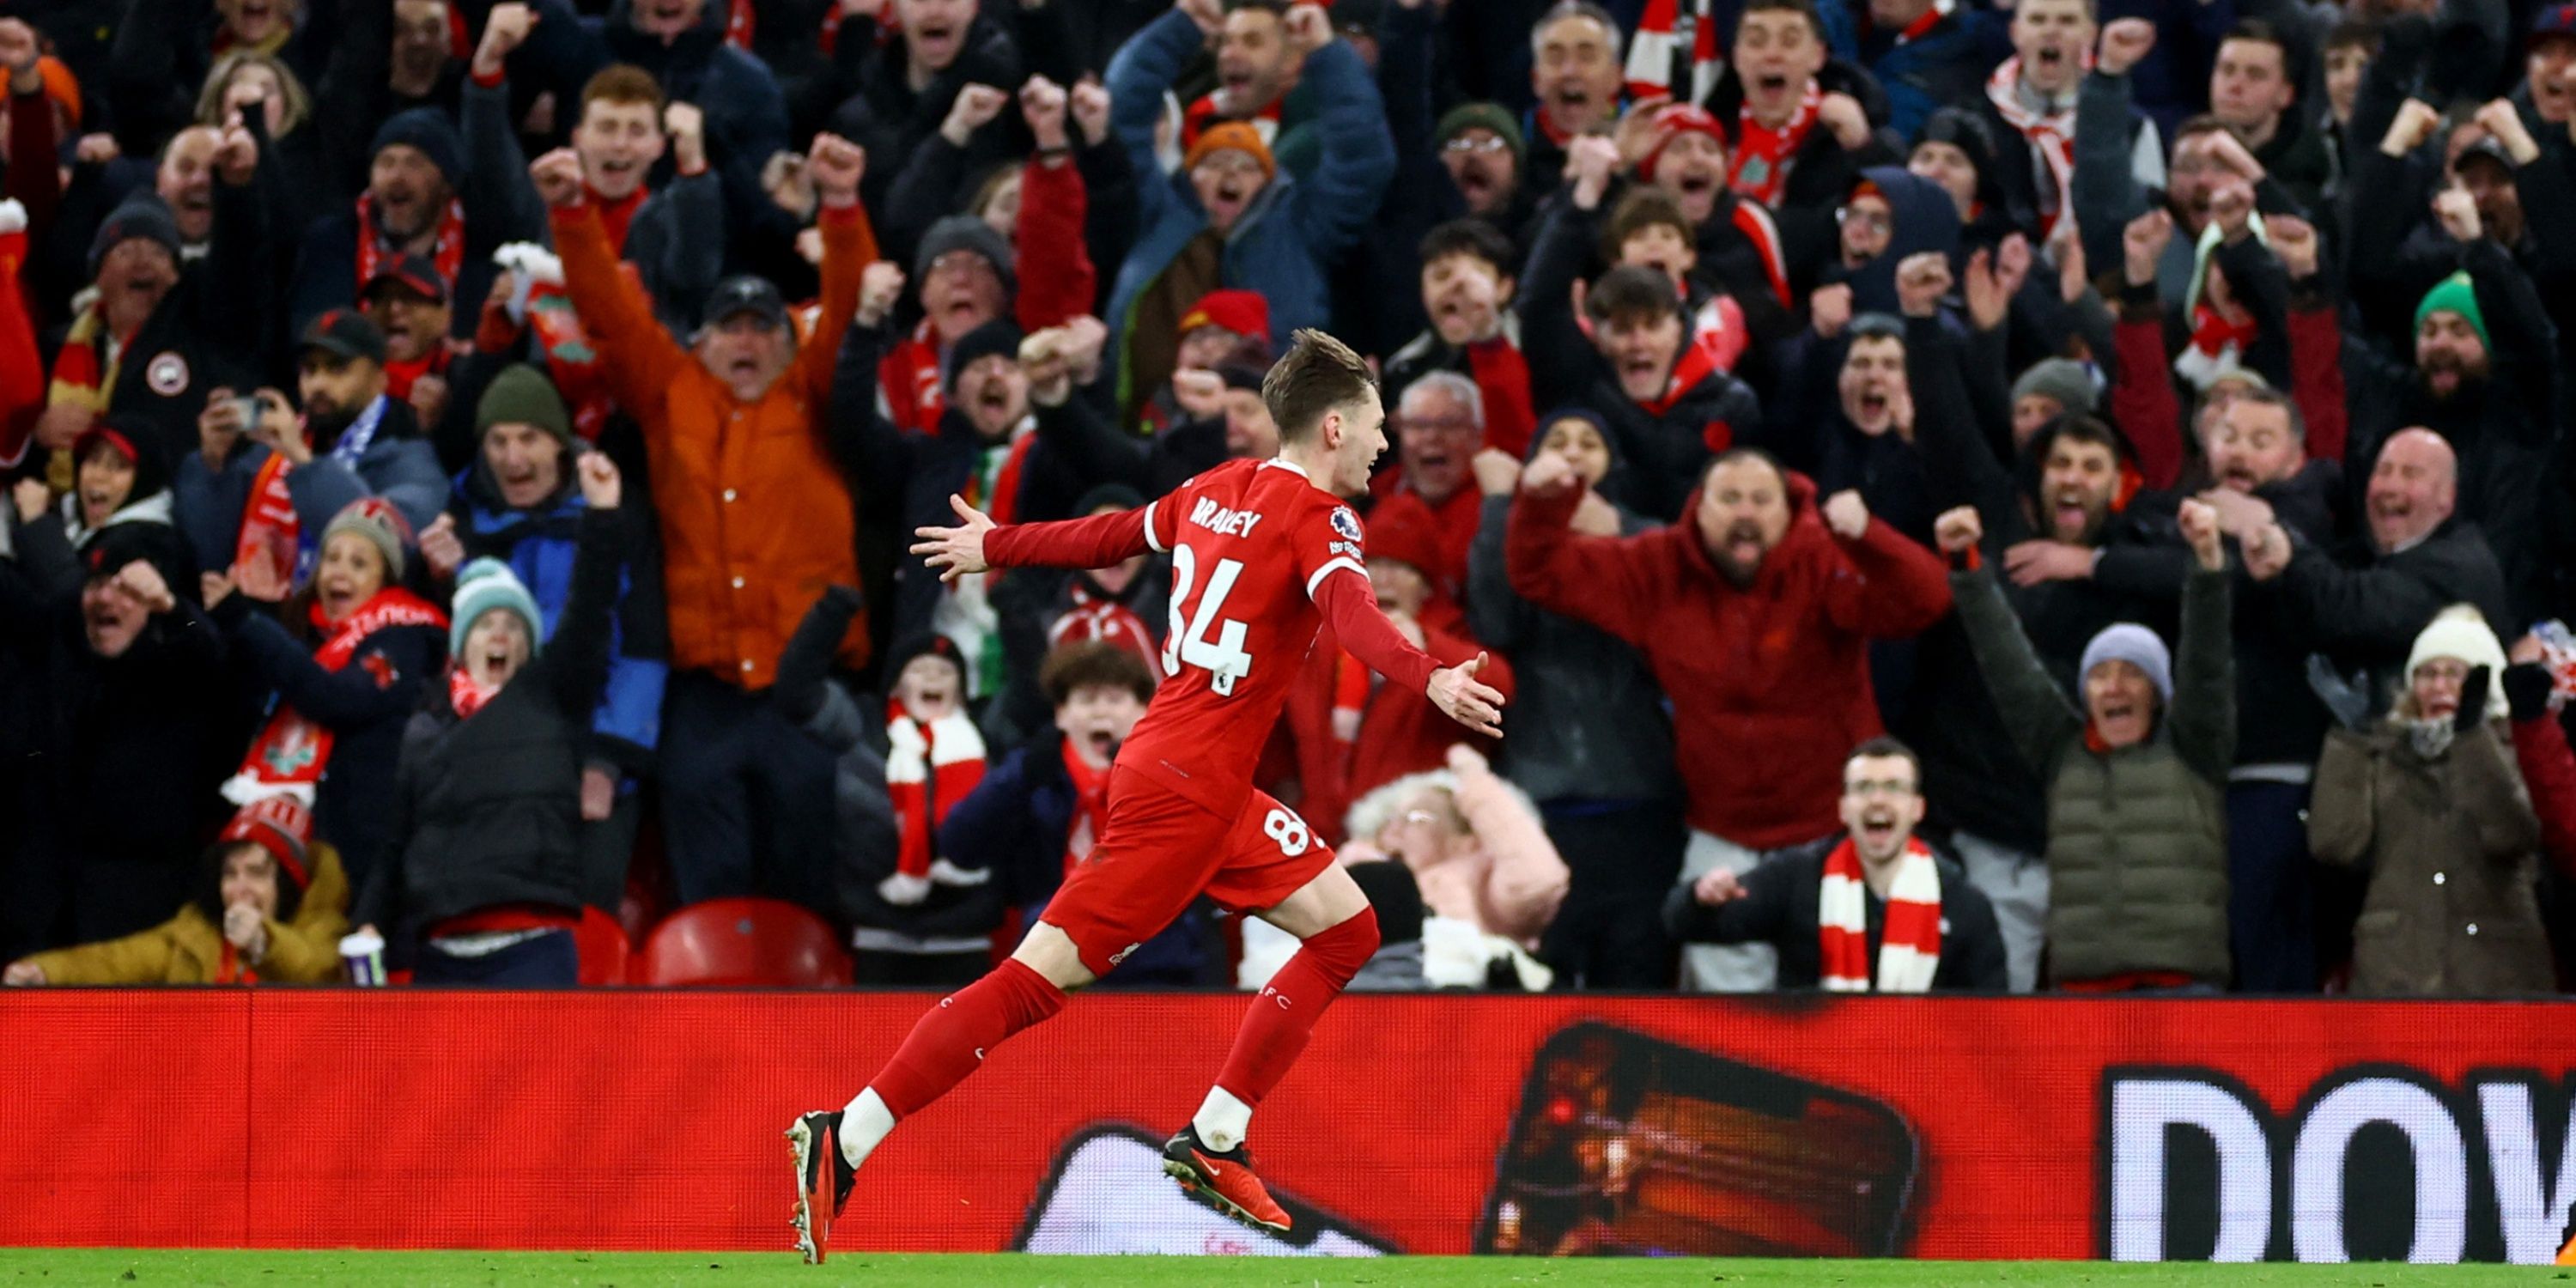 Conor Bradley celebrates after scoring for Liverpool.